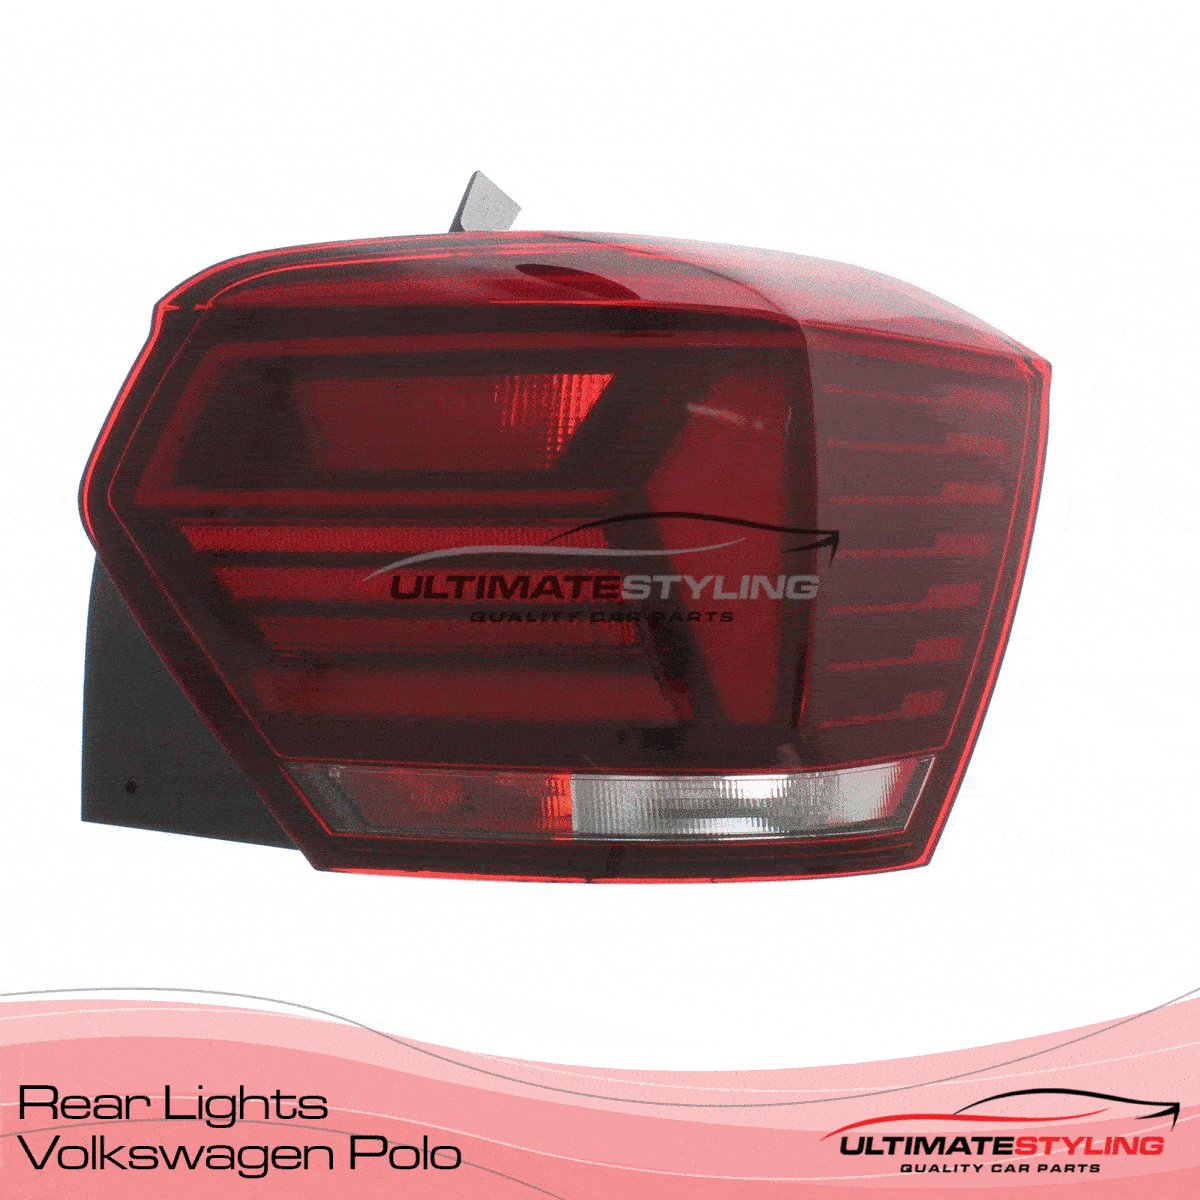 360 view of a VW Polo Tail Light